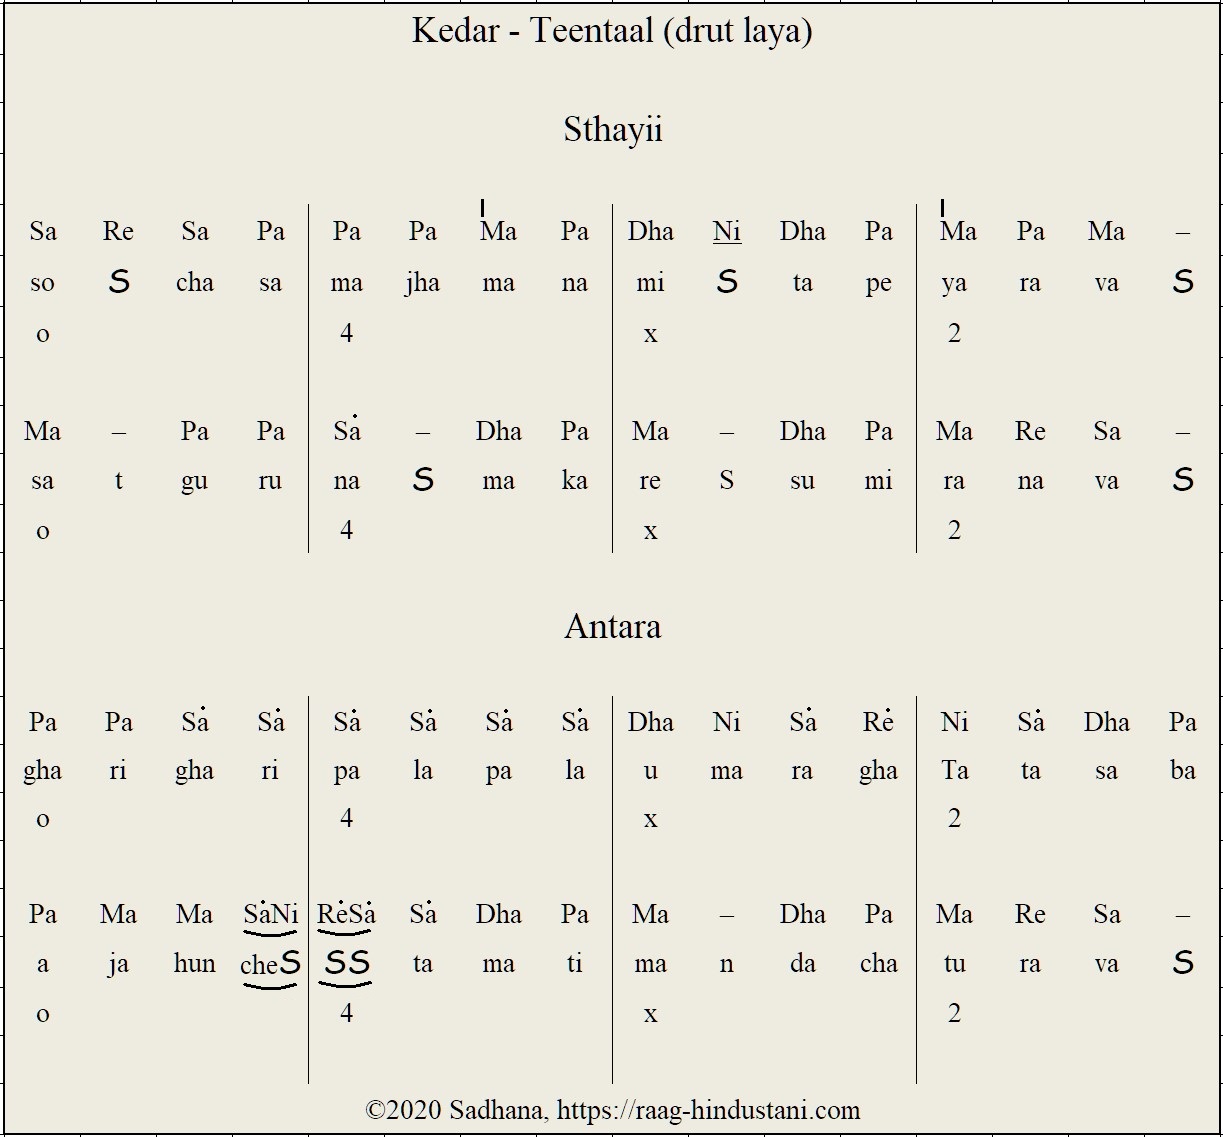 Bhatkhande notation system for Indian classical music